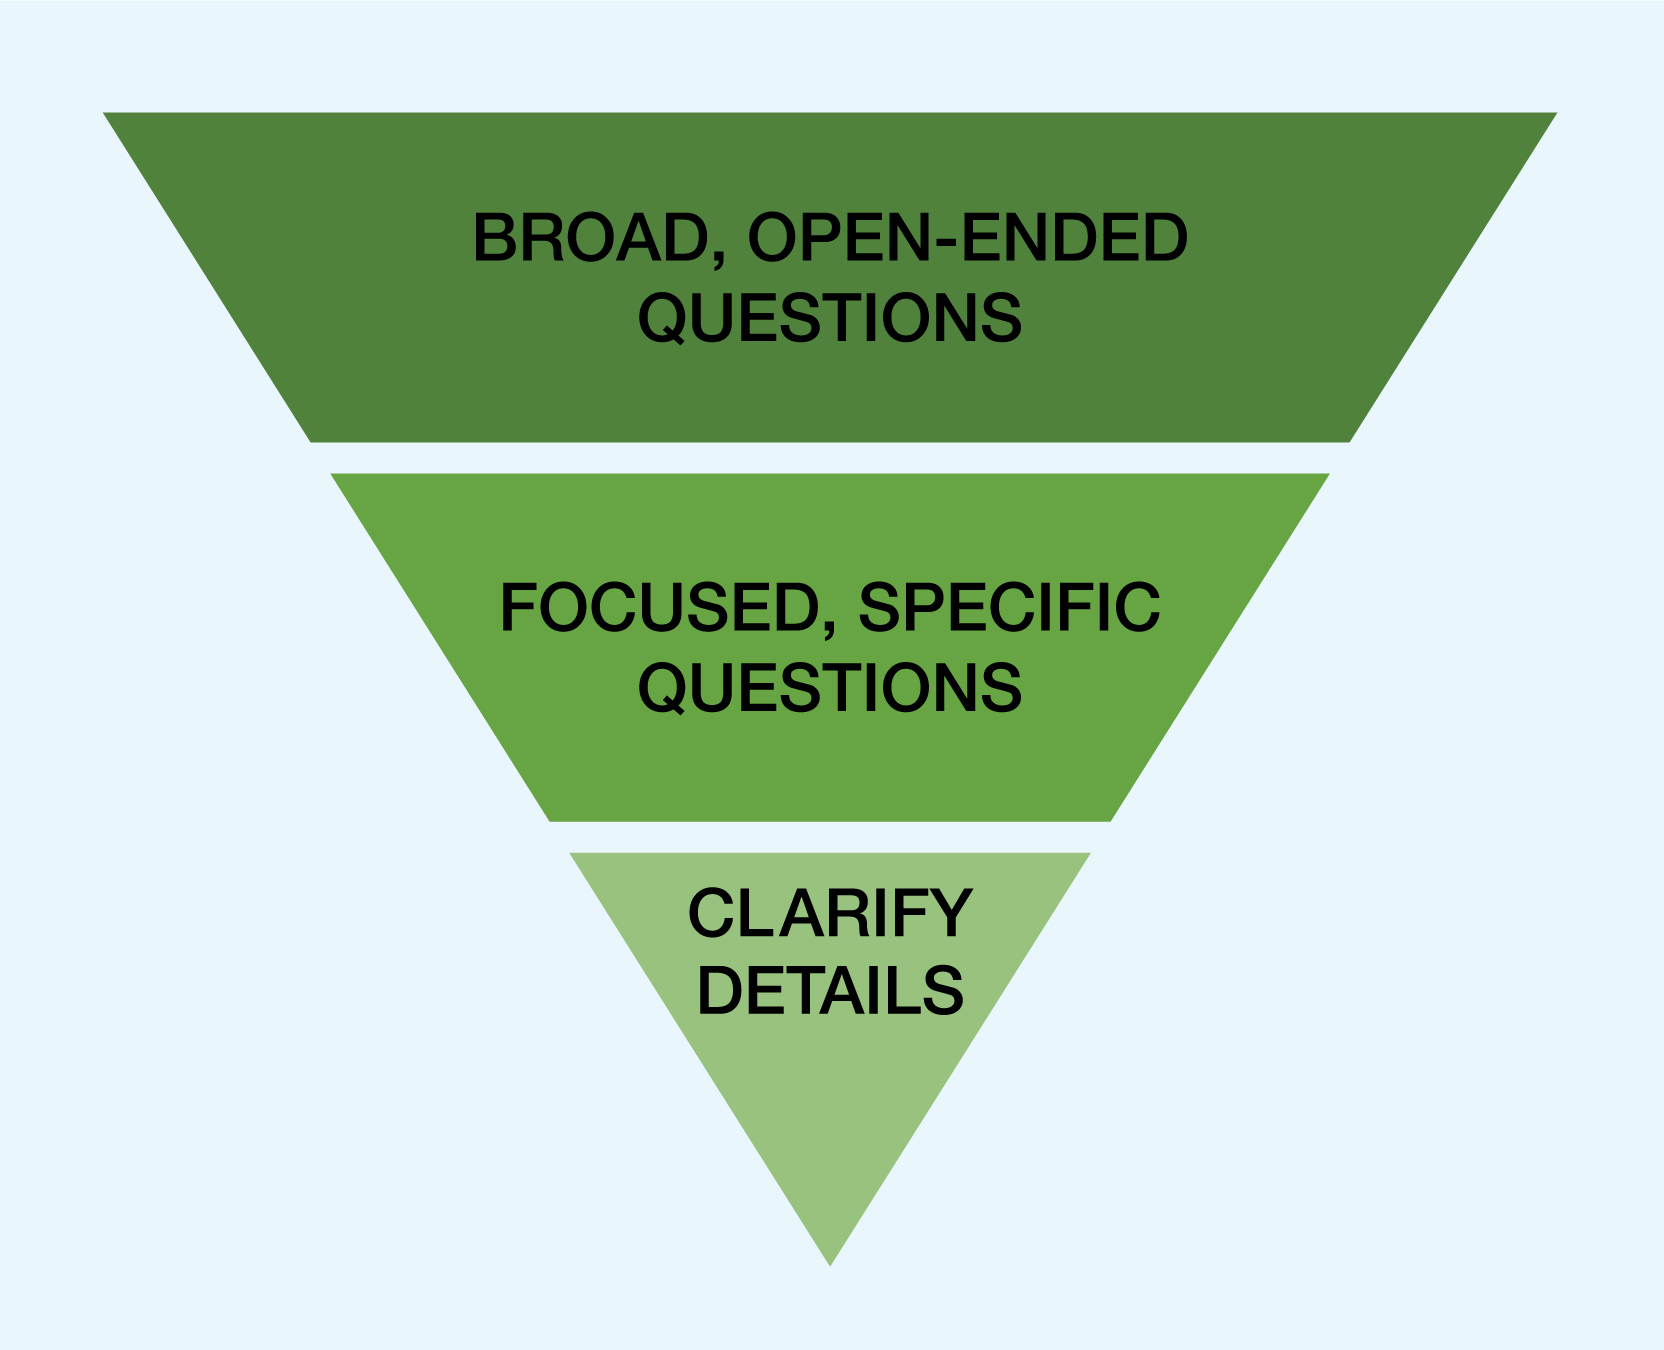 Upside-down triangle with three sections of text: 'Broad, open-ended questions' on top; 'Focused, specific questions' in middle; 'Clarify details' on bottom